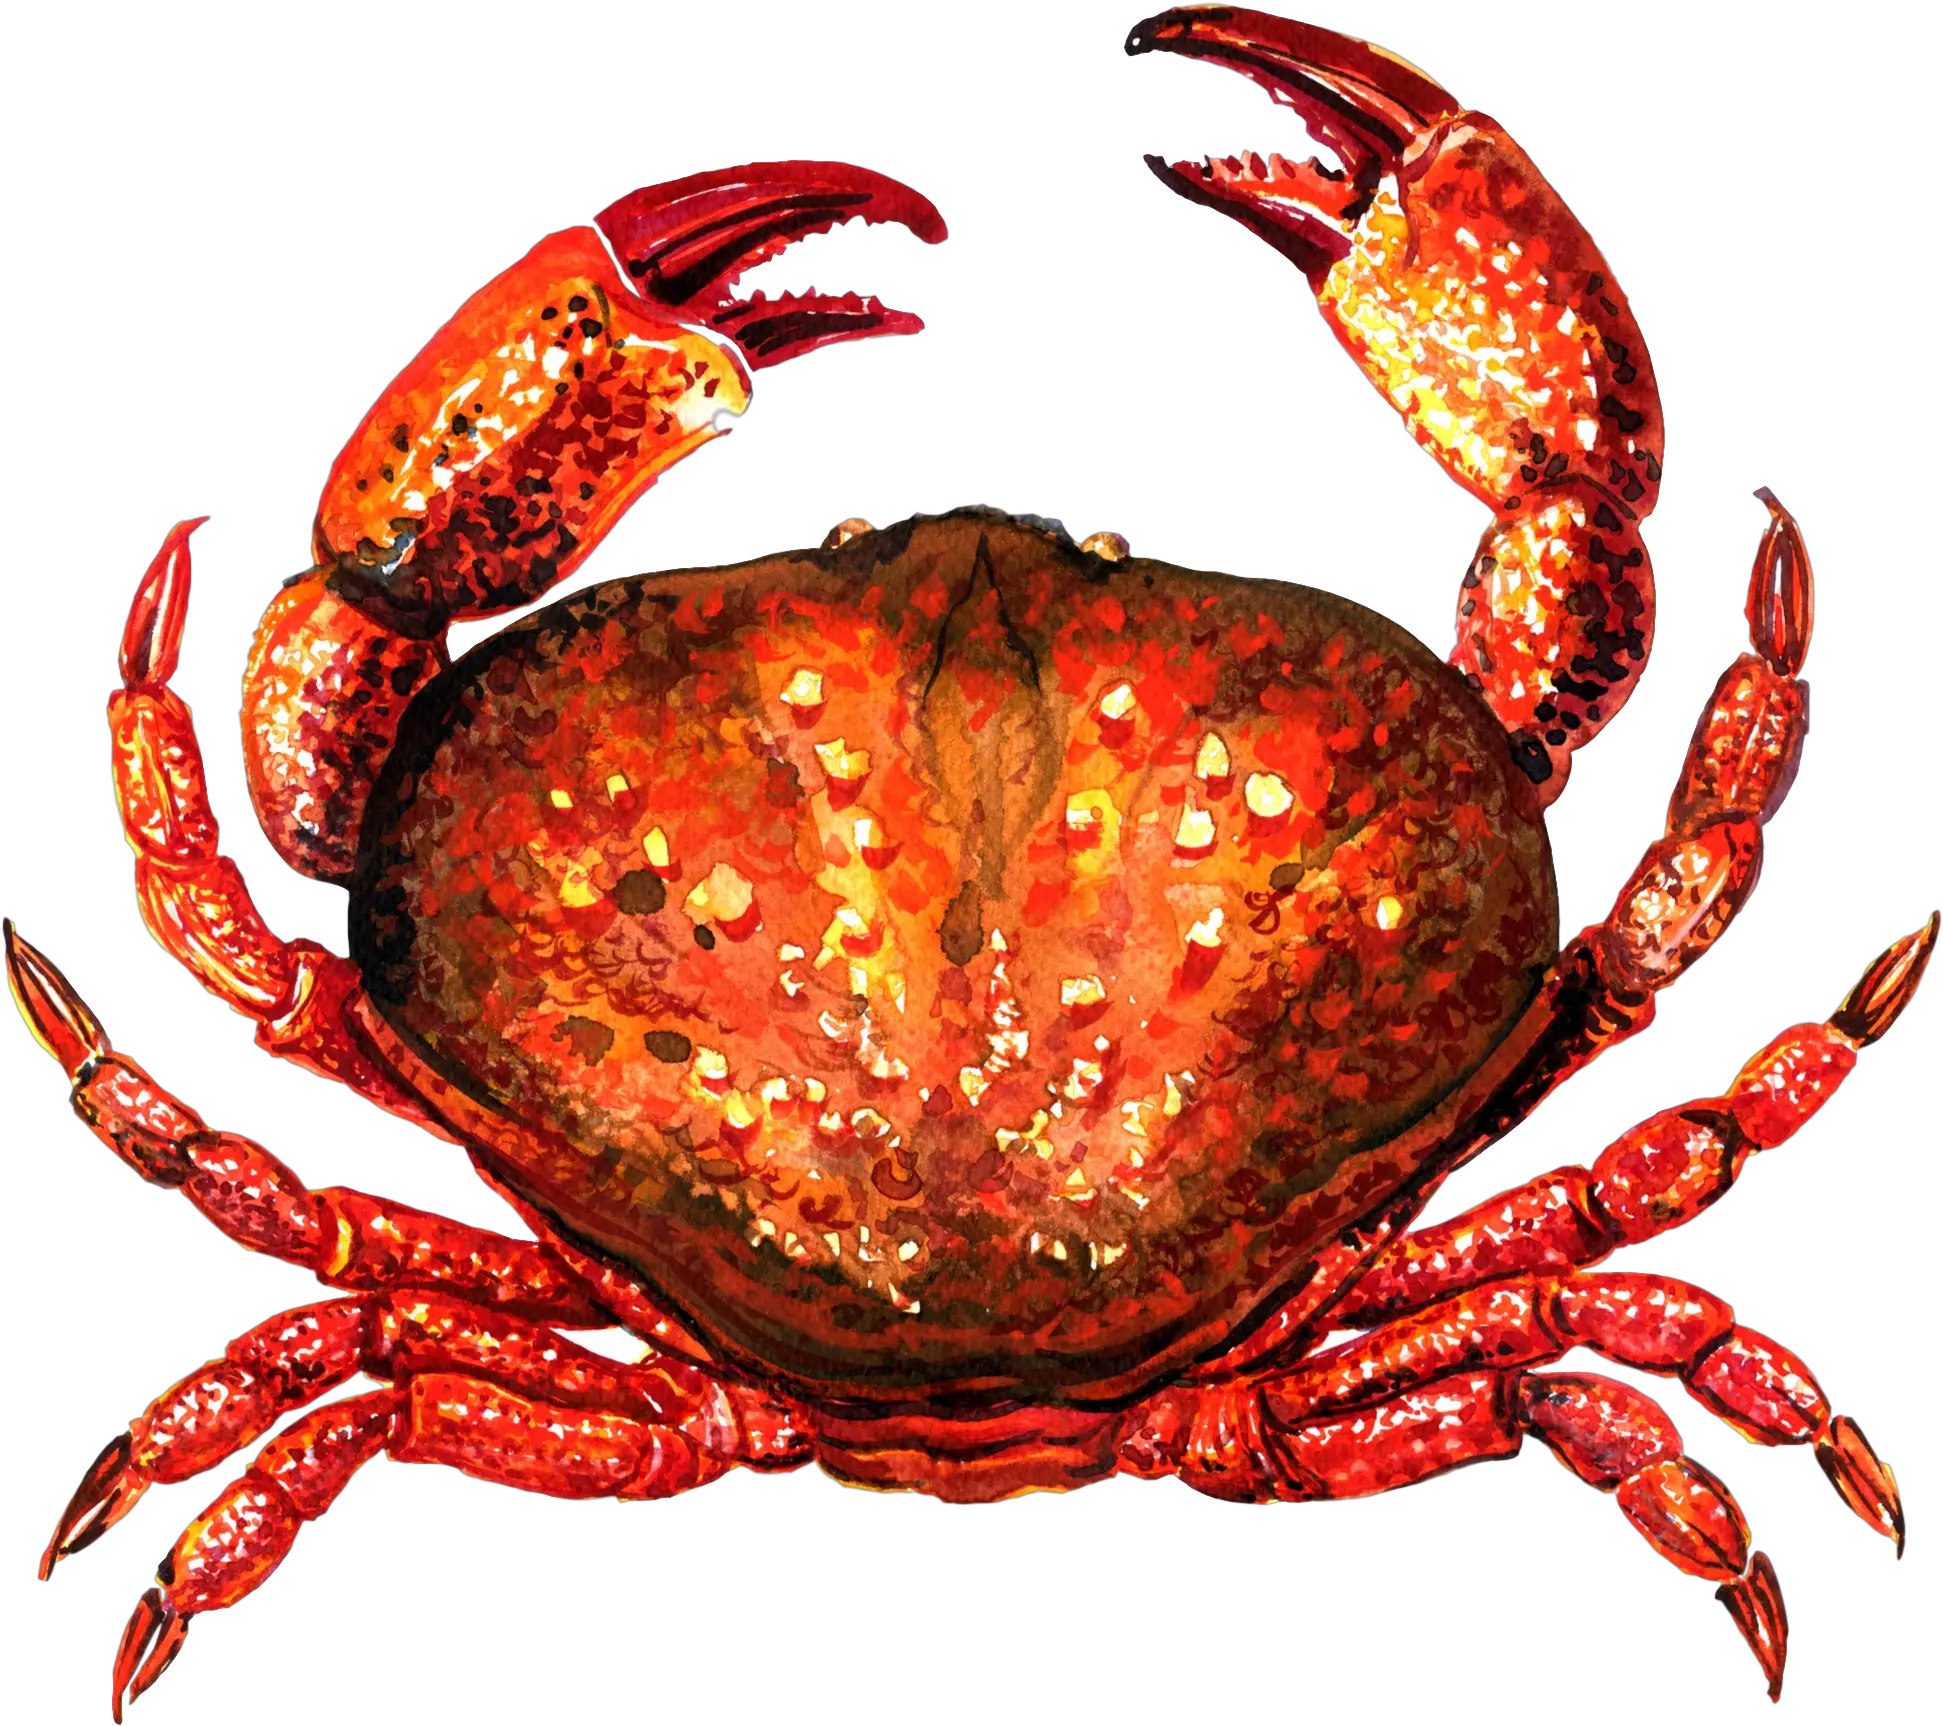 Transparent Crab File U0026 Png Clipart Free Crab Wikimedia Commons Crab Transparent Background